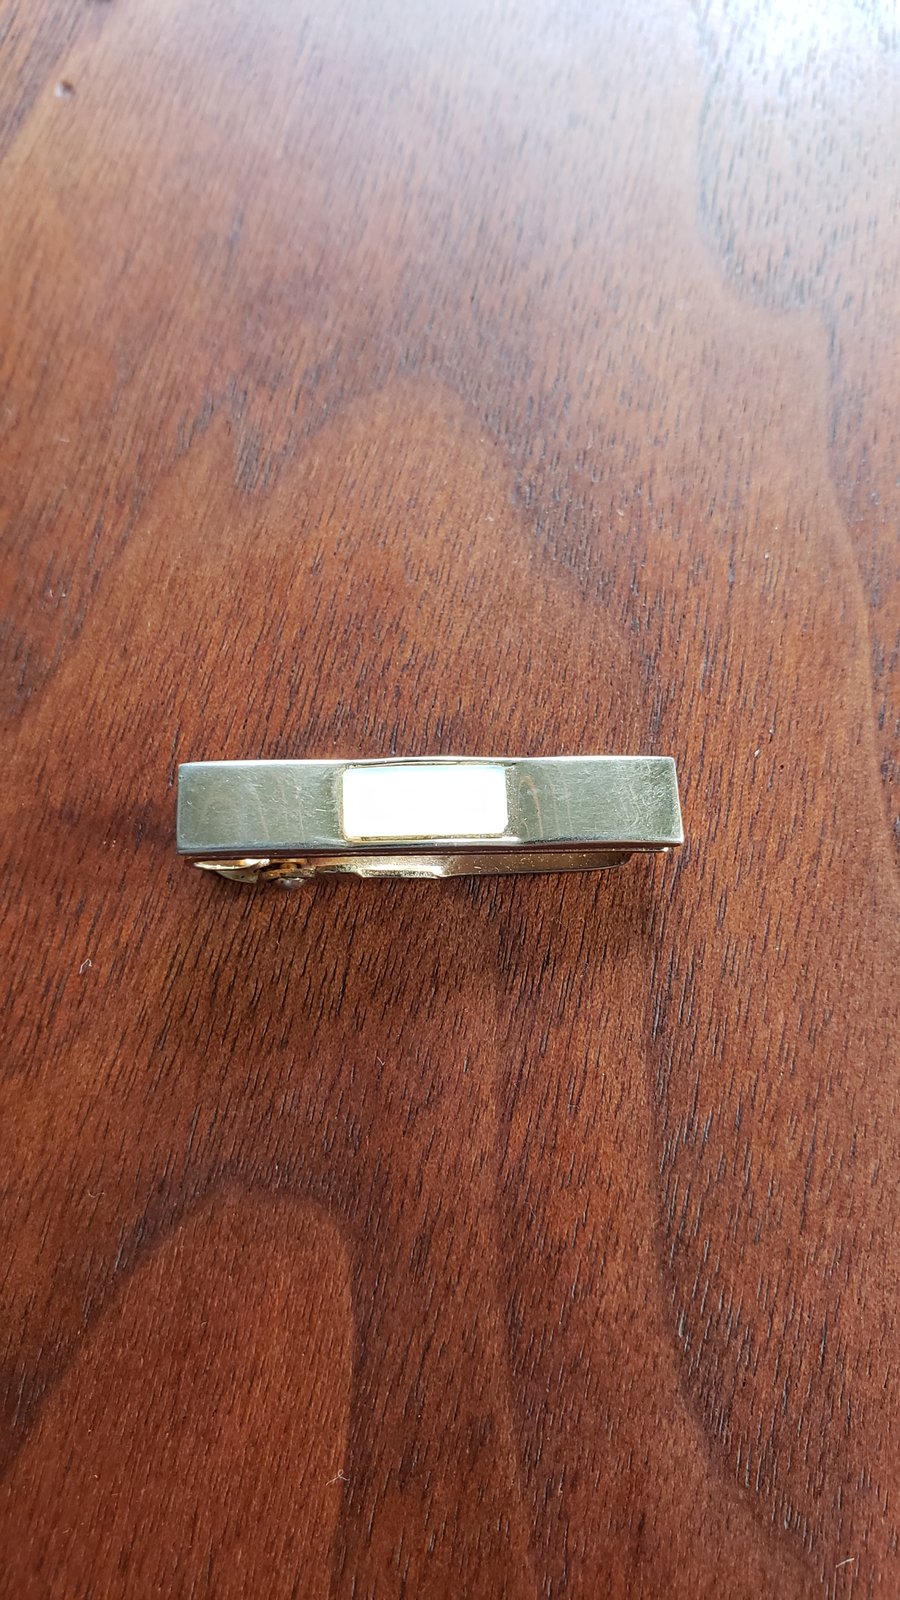 Image of Vintage gold tone tie clip with Mother of Pearl inset by Swank